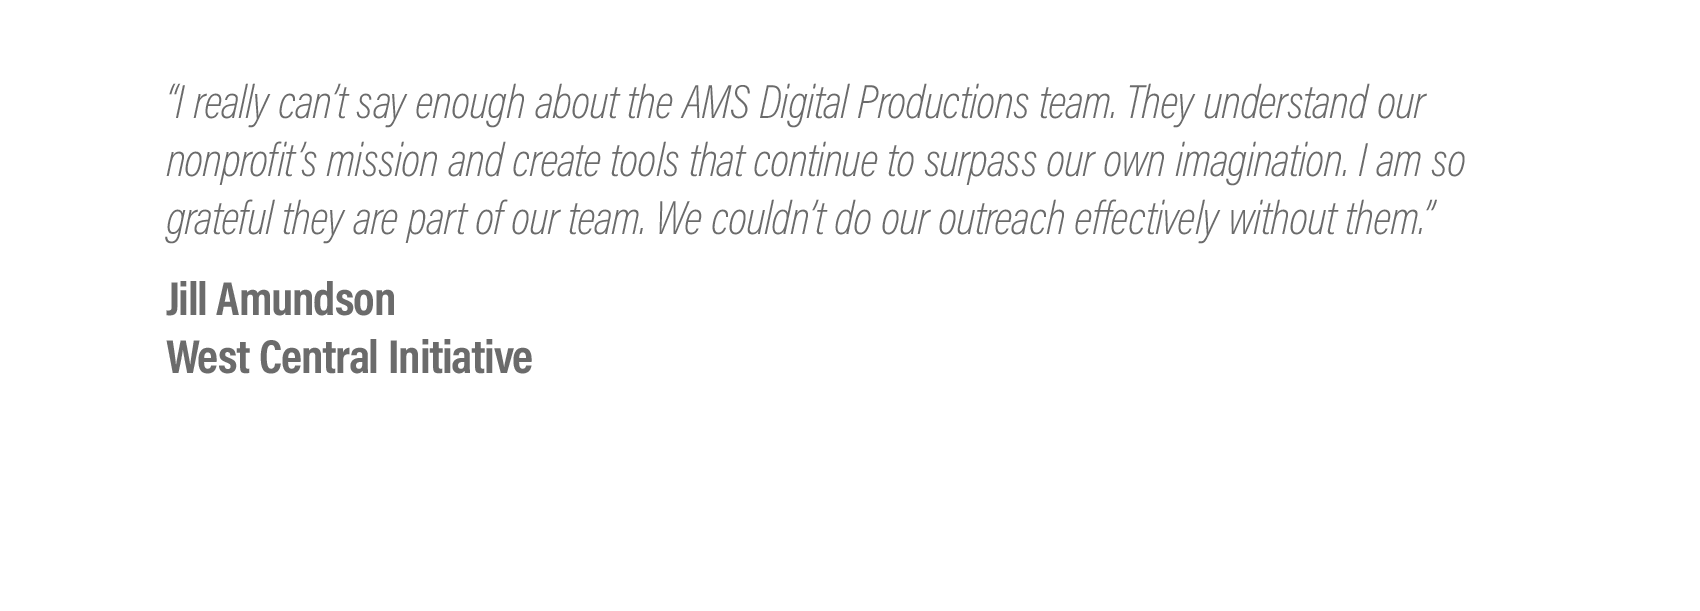  “I really can’t say enough about the AMS Digital Productions team. They understand our nonprofit’s mission and create tools that continue to surpass our own imagination. I am so grateful they are part of our team. We couldn’t do our outreach effecti